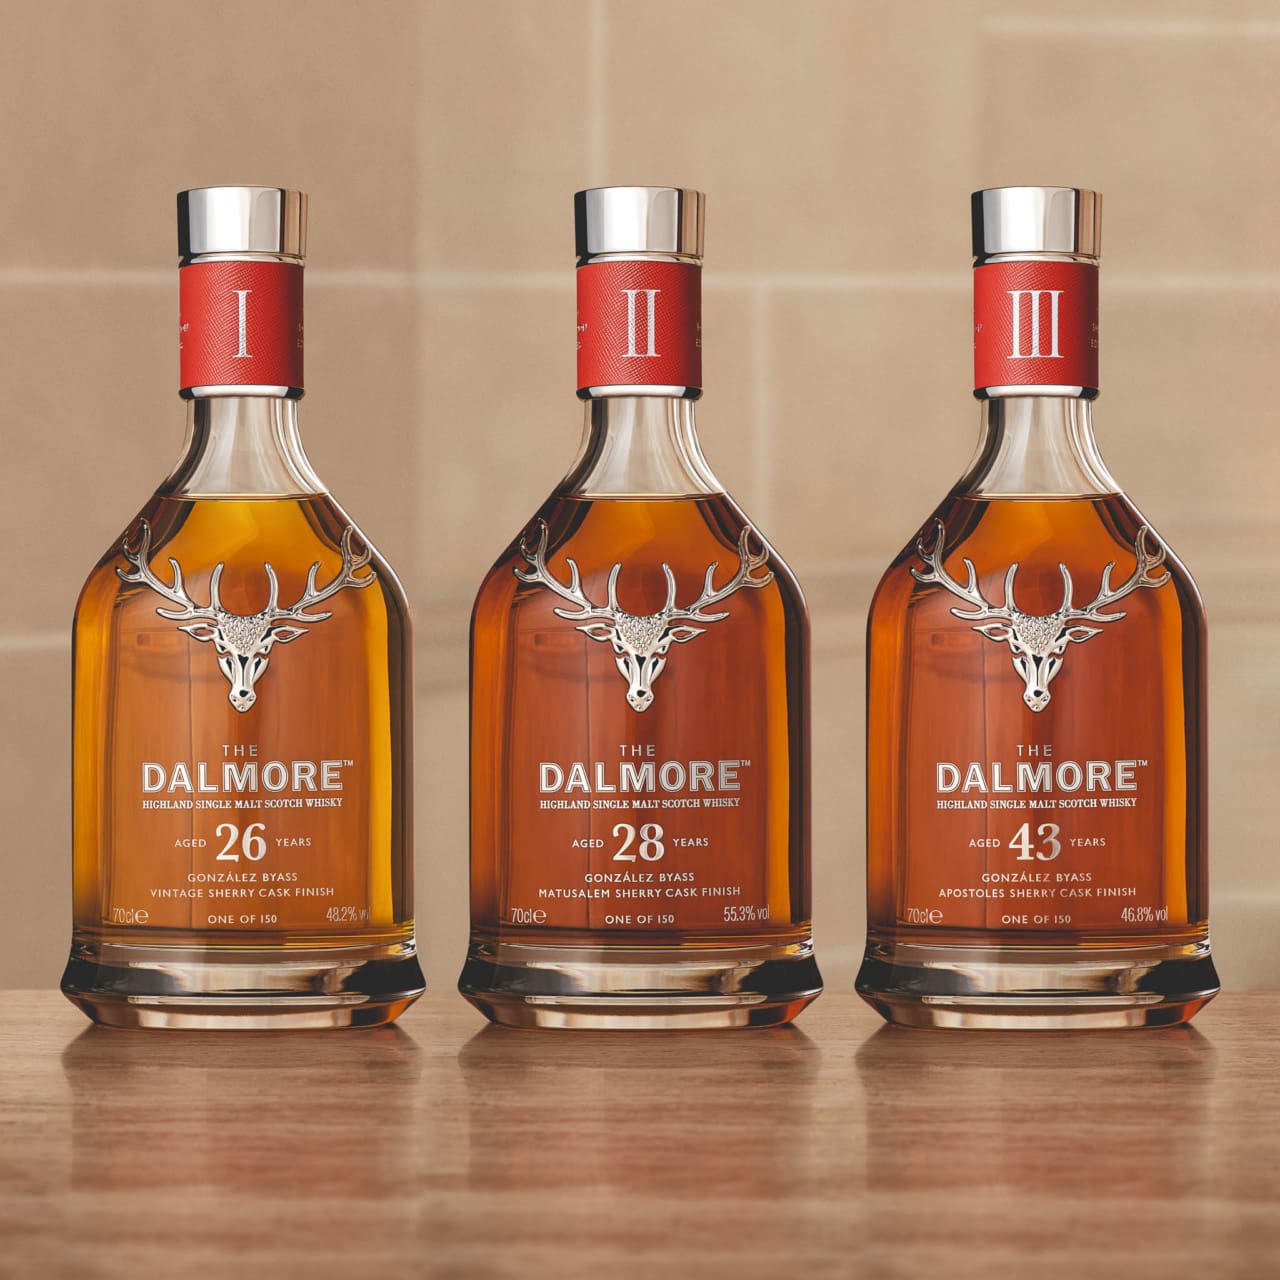 The Dalmore, <strong>The Dalmore</strong> stopt 180 jaar whisky-ervaring in de Cask Curation Series